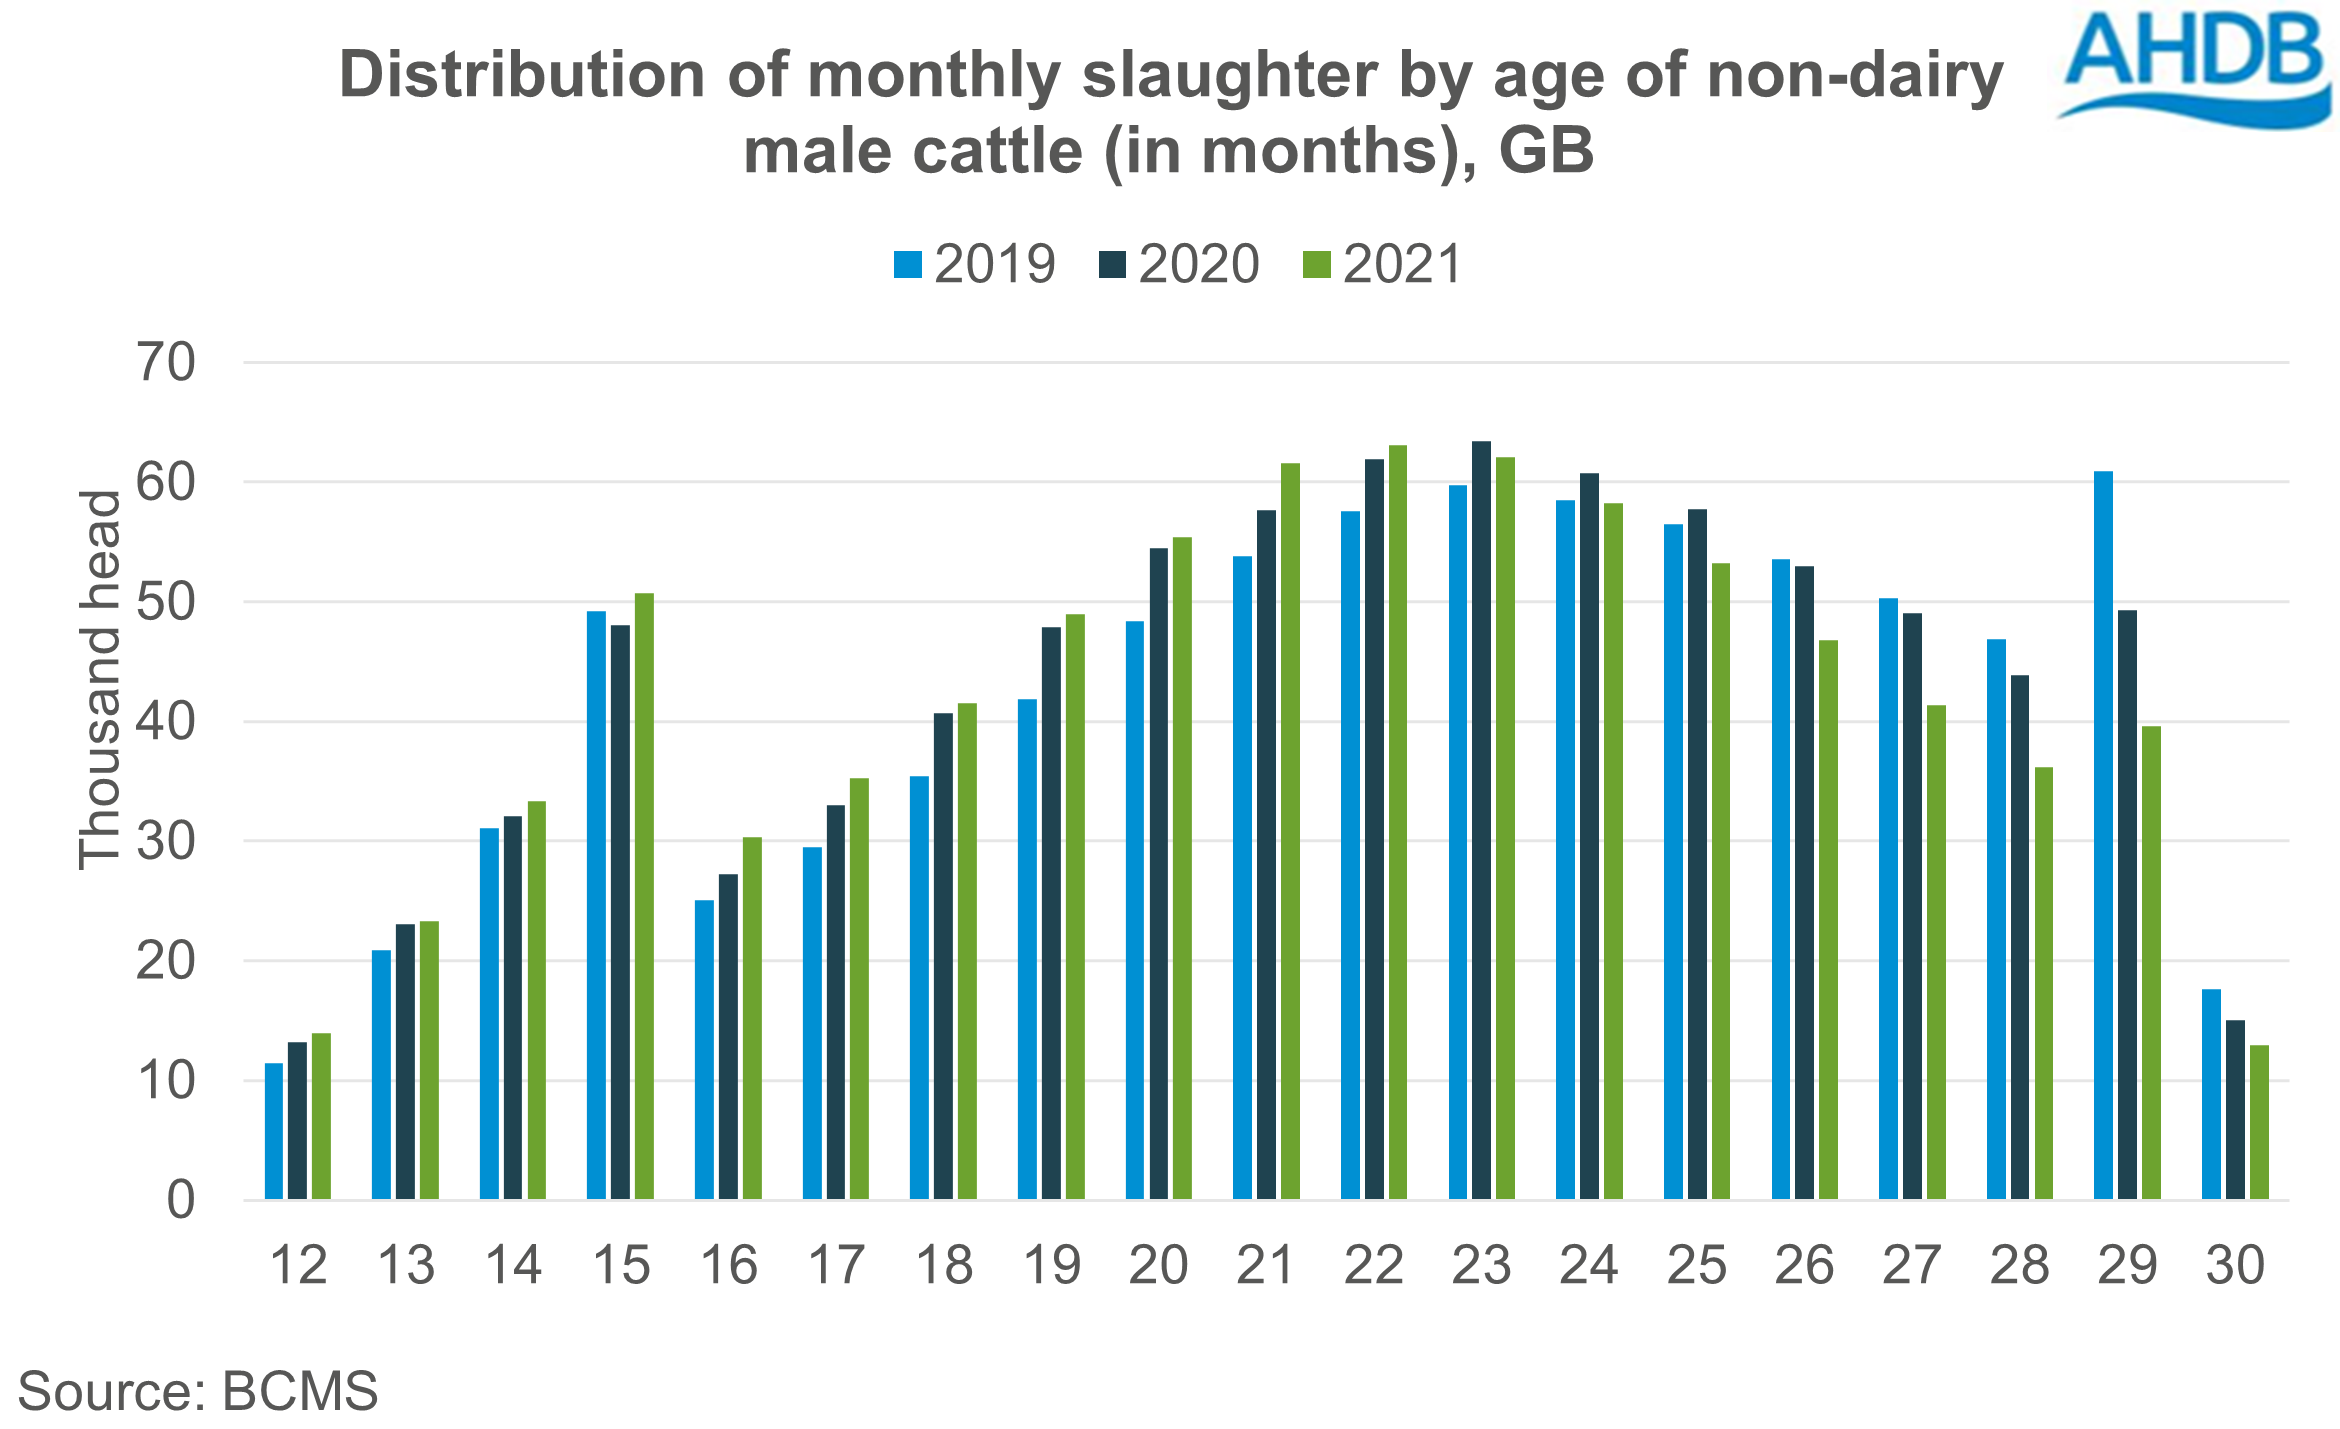 chart showing distribution of monthly cattle slaughter by age in months GB - non dairy males